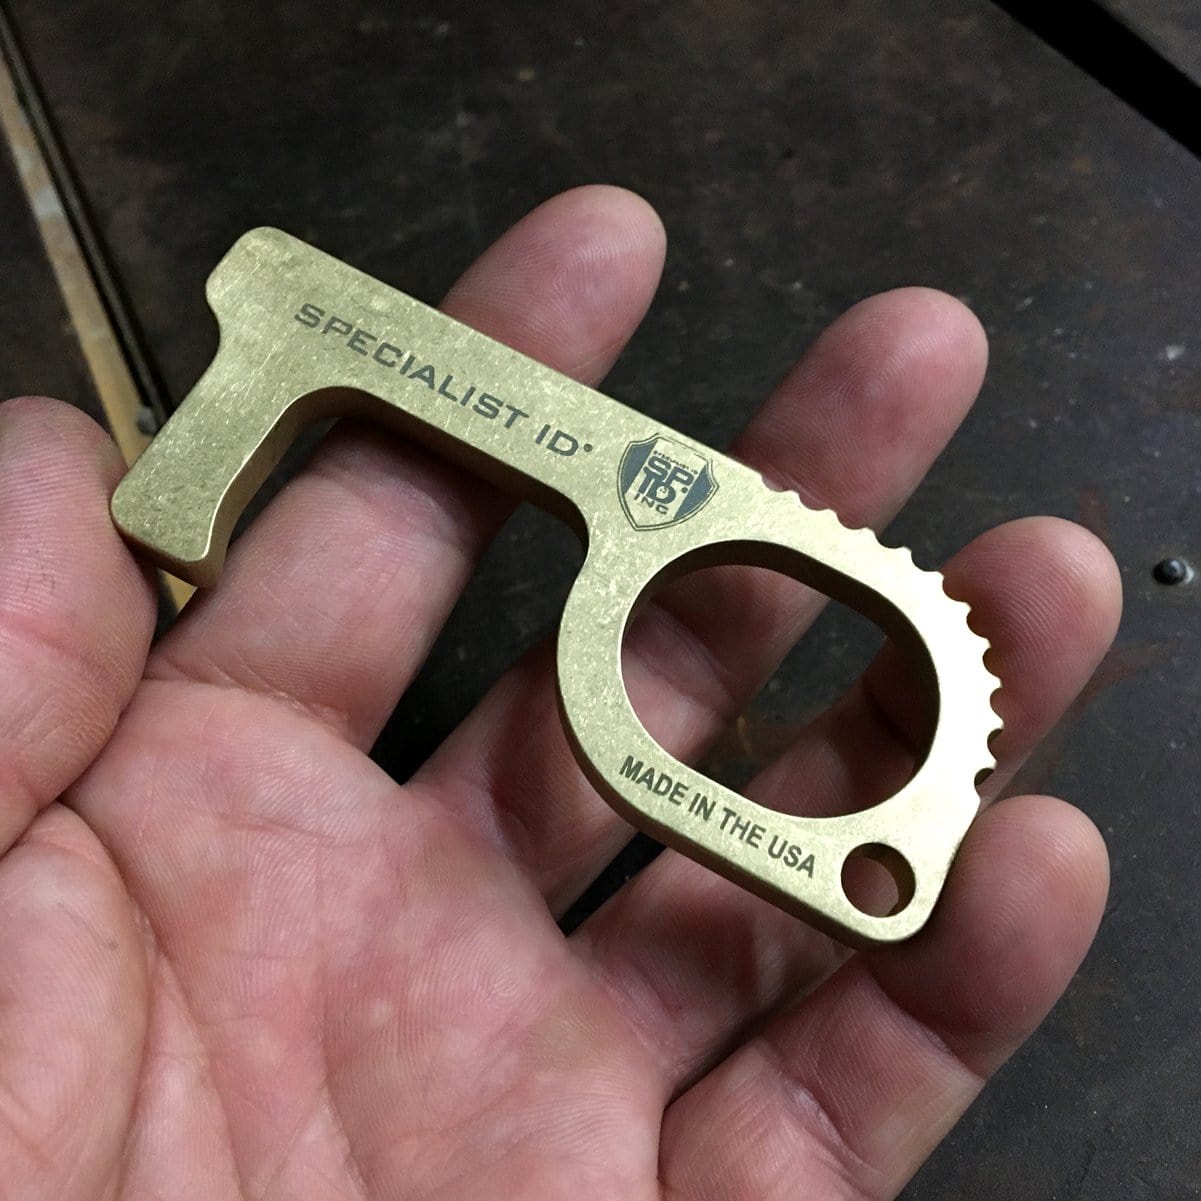 Heavy Duty No Touch Door Opener Tool - Hands Free EDC Multitool USA Made of Solid Brass 7743-1000